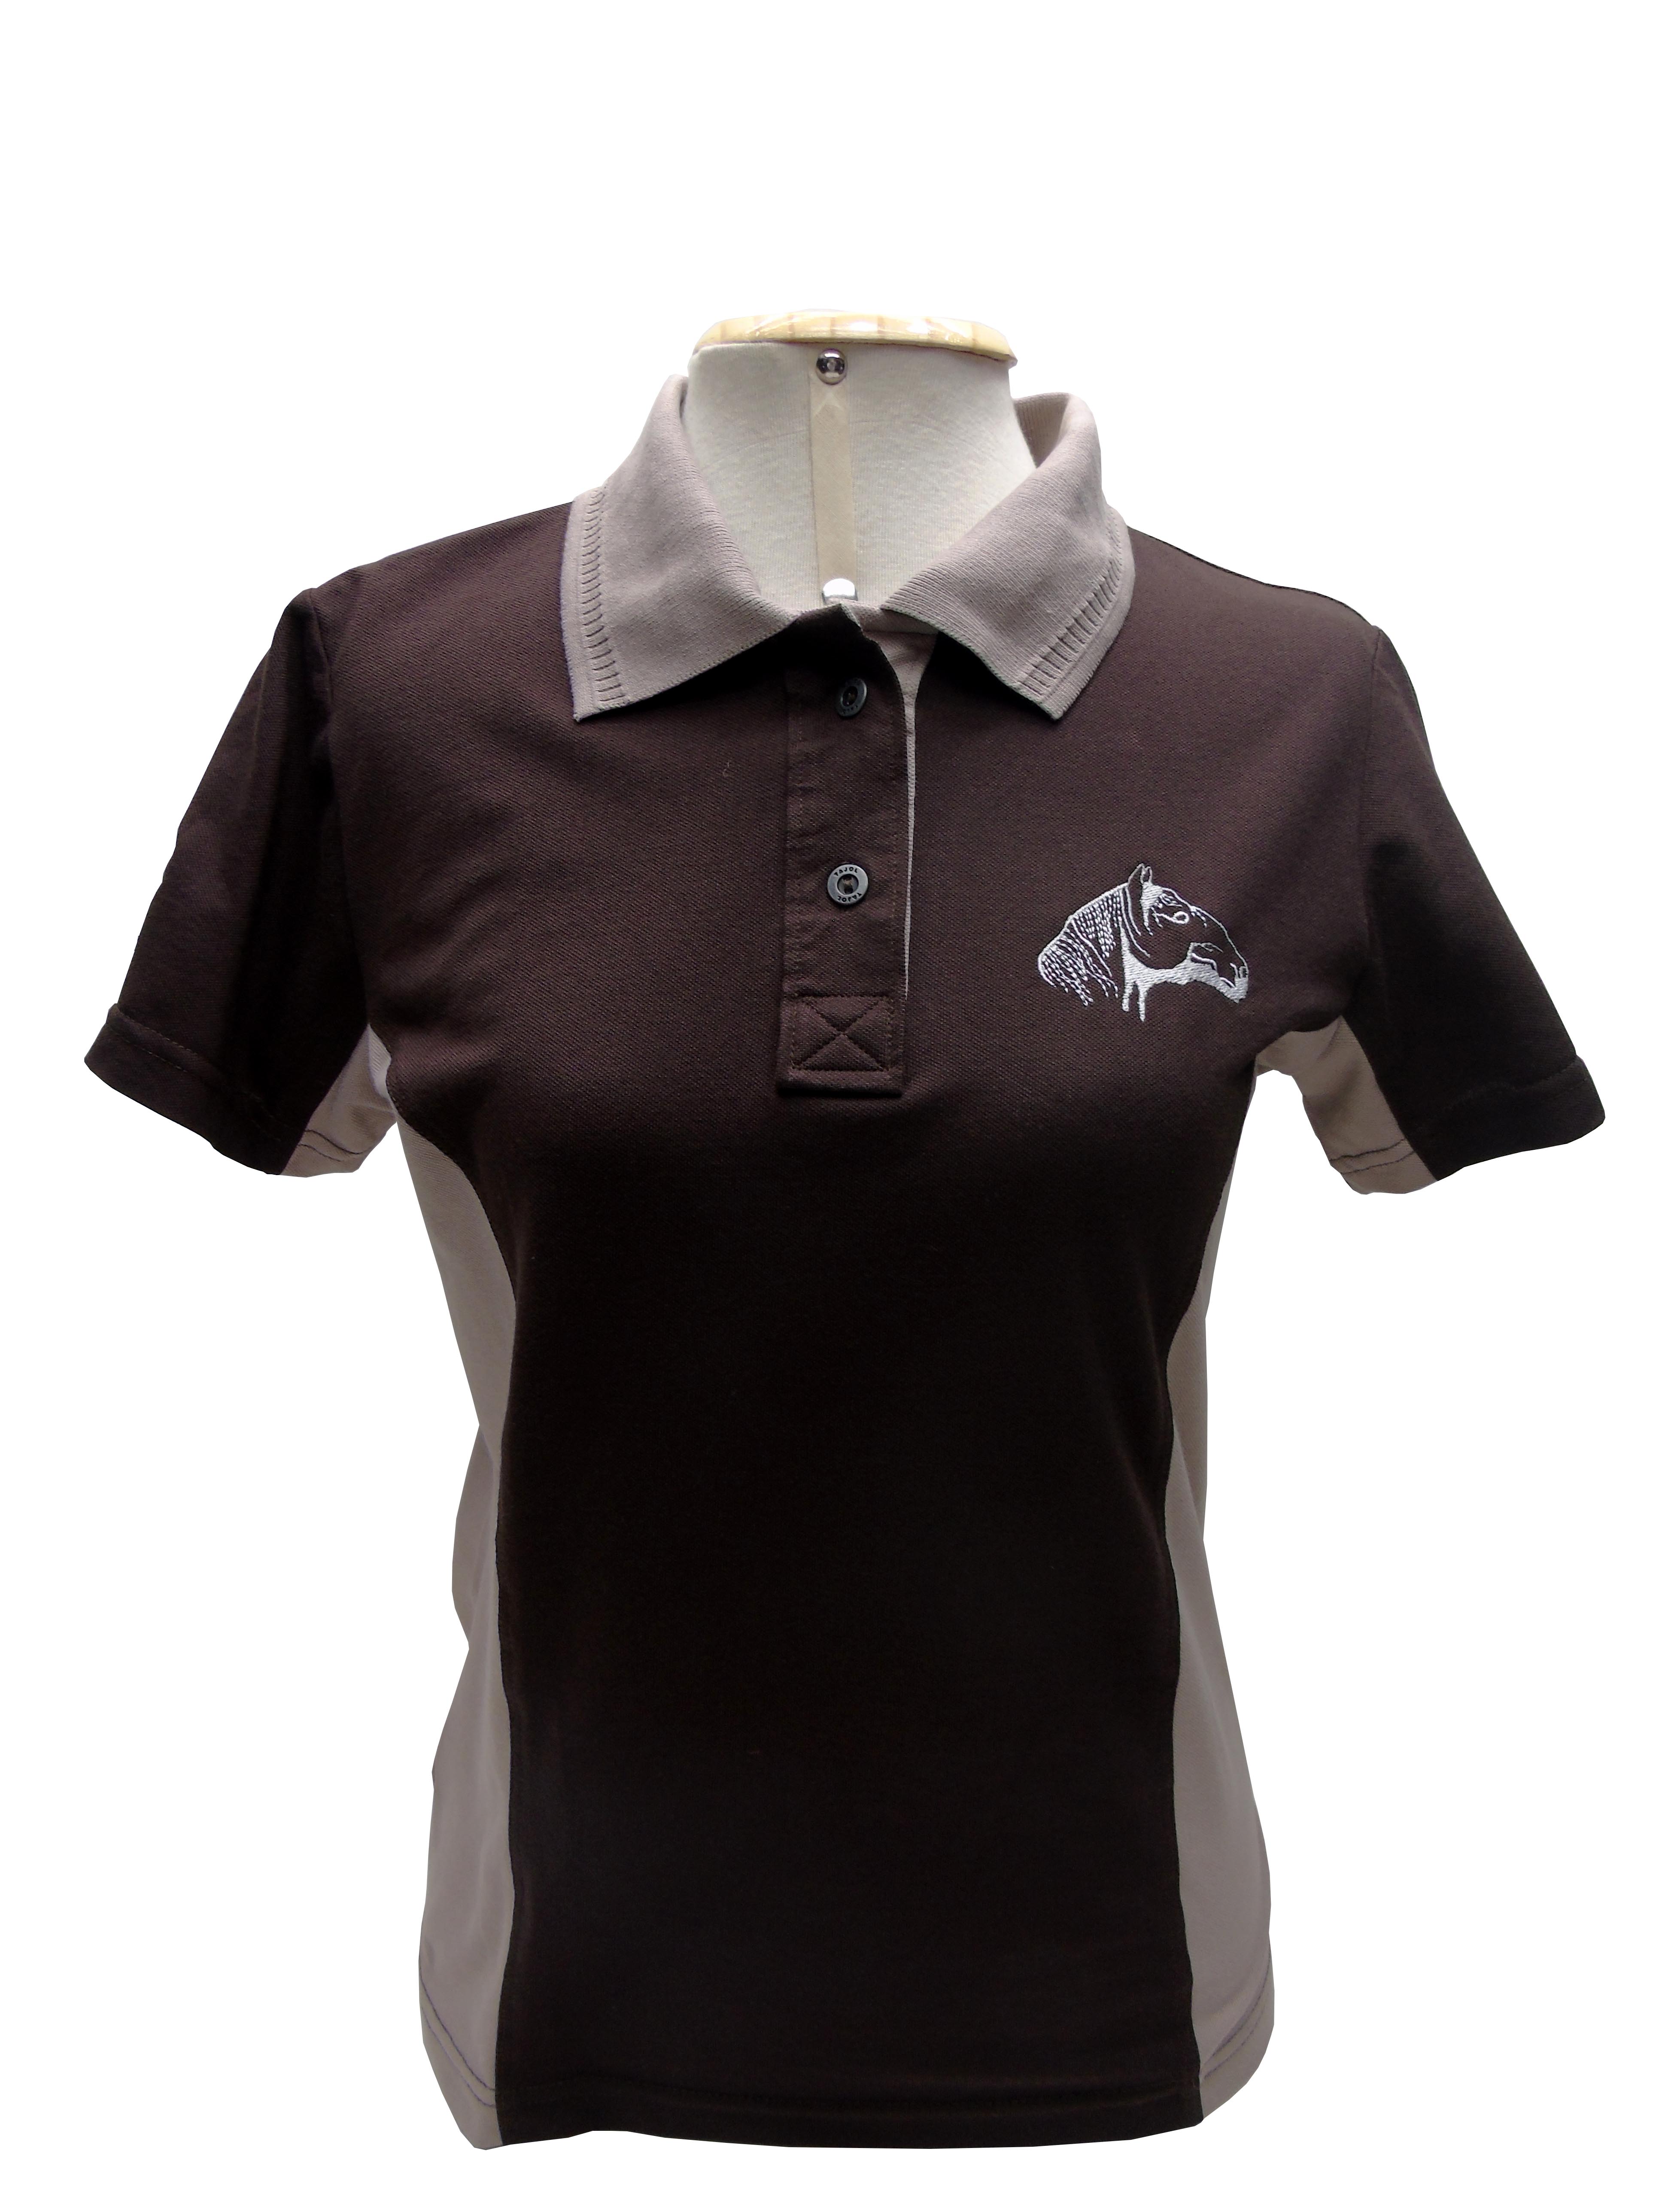 Polo Infantil Cavalo Crioulo Marrom/bege